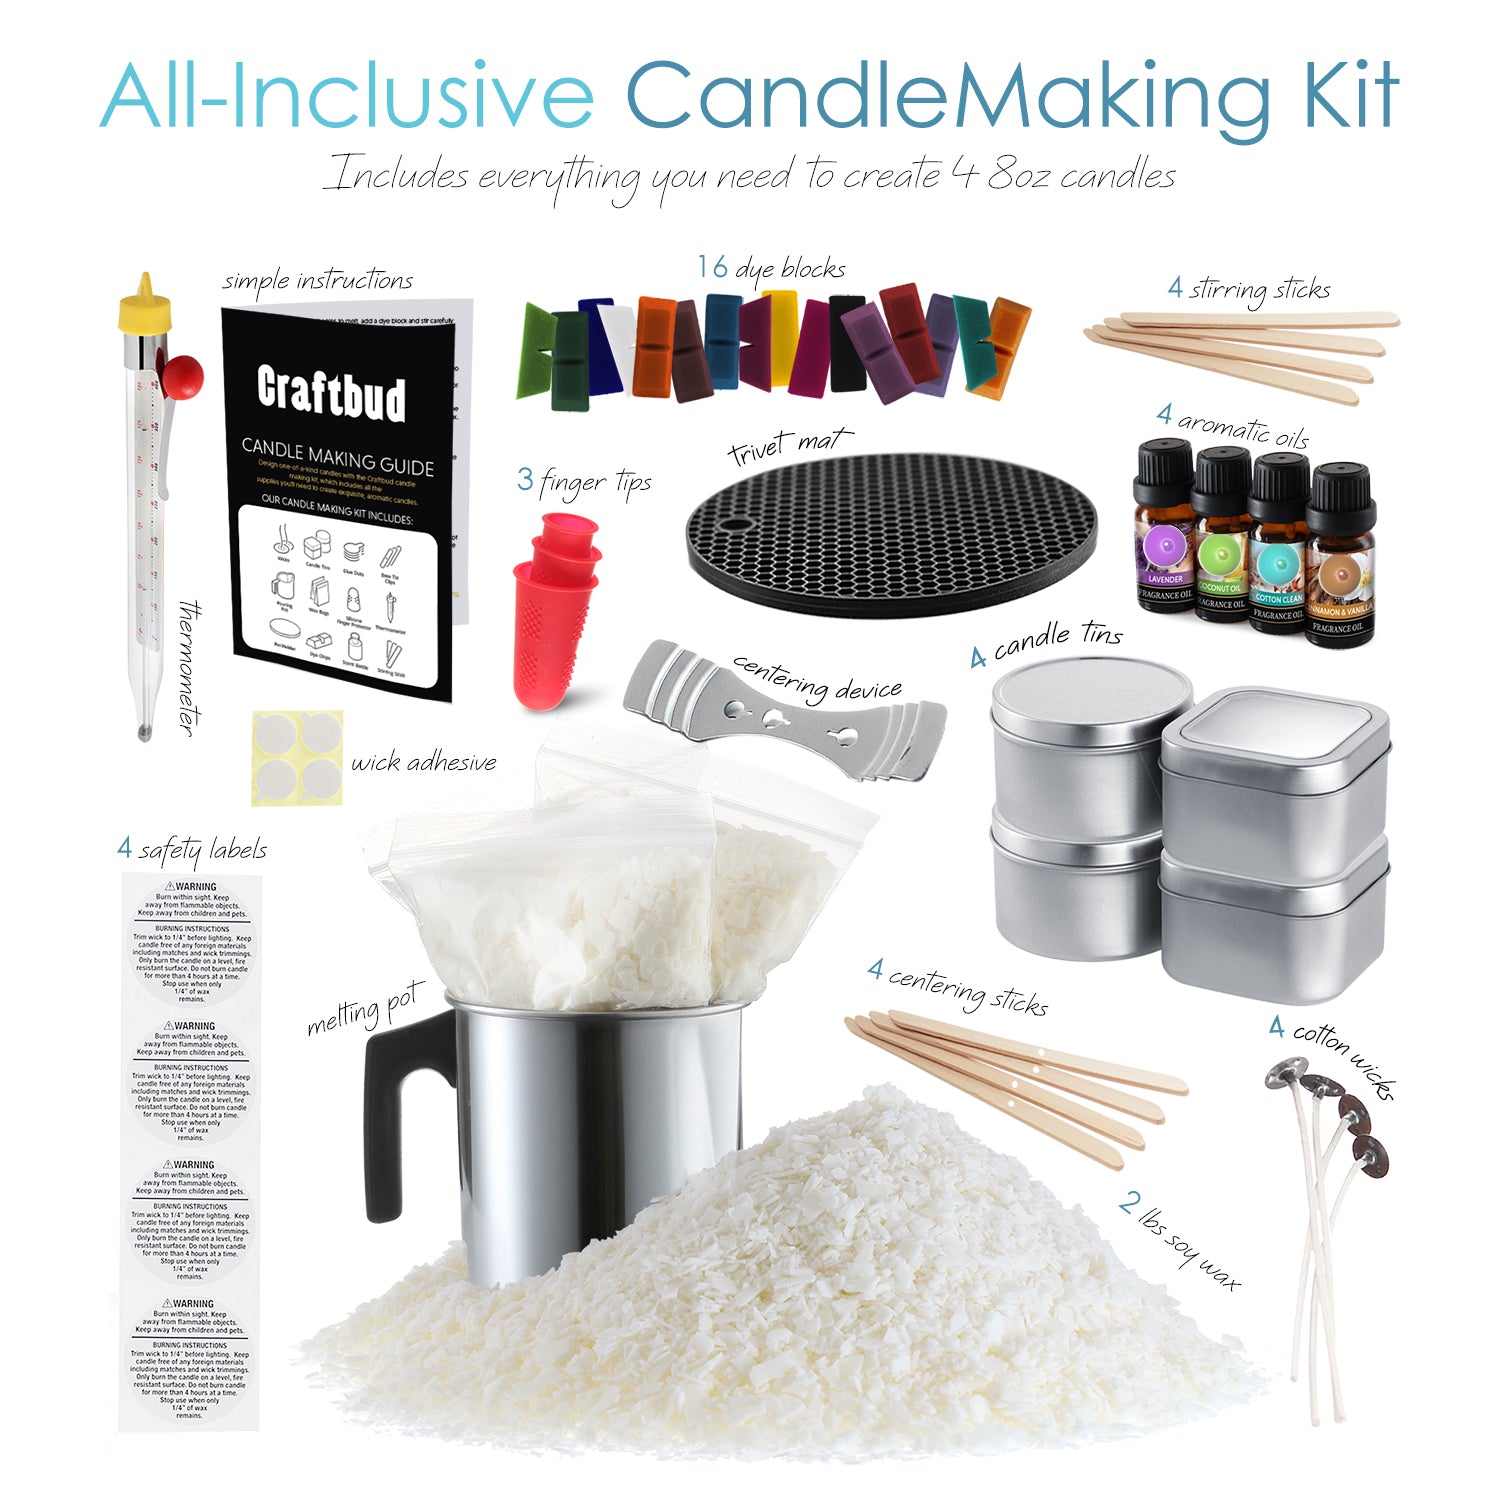 TBWIND Candle Making Kit, Soy Candle Making Supplies DIY Candle Craft Tools for Adults, Kids, Beginners with 8 Pleasant Scents, Melting Pot, Wicks, Wa